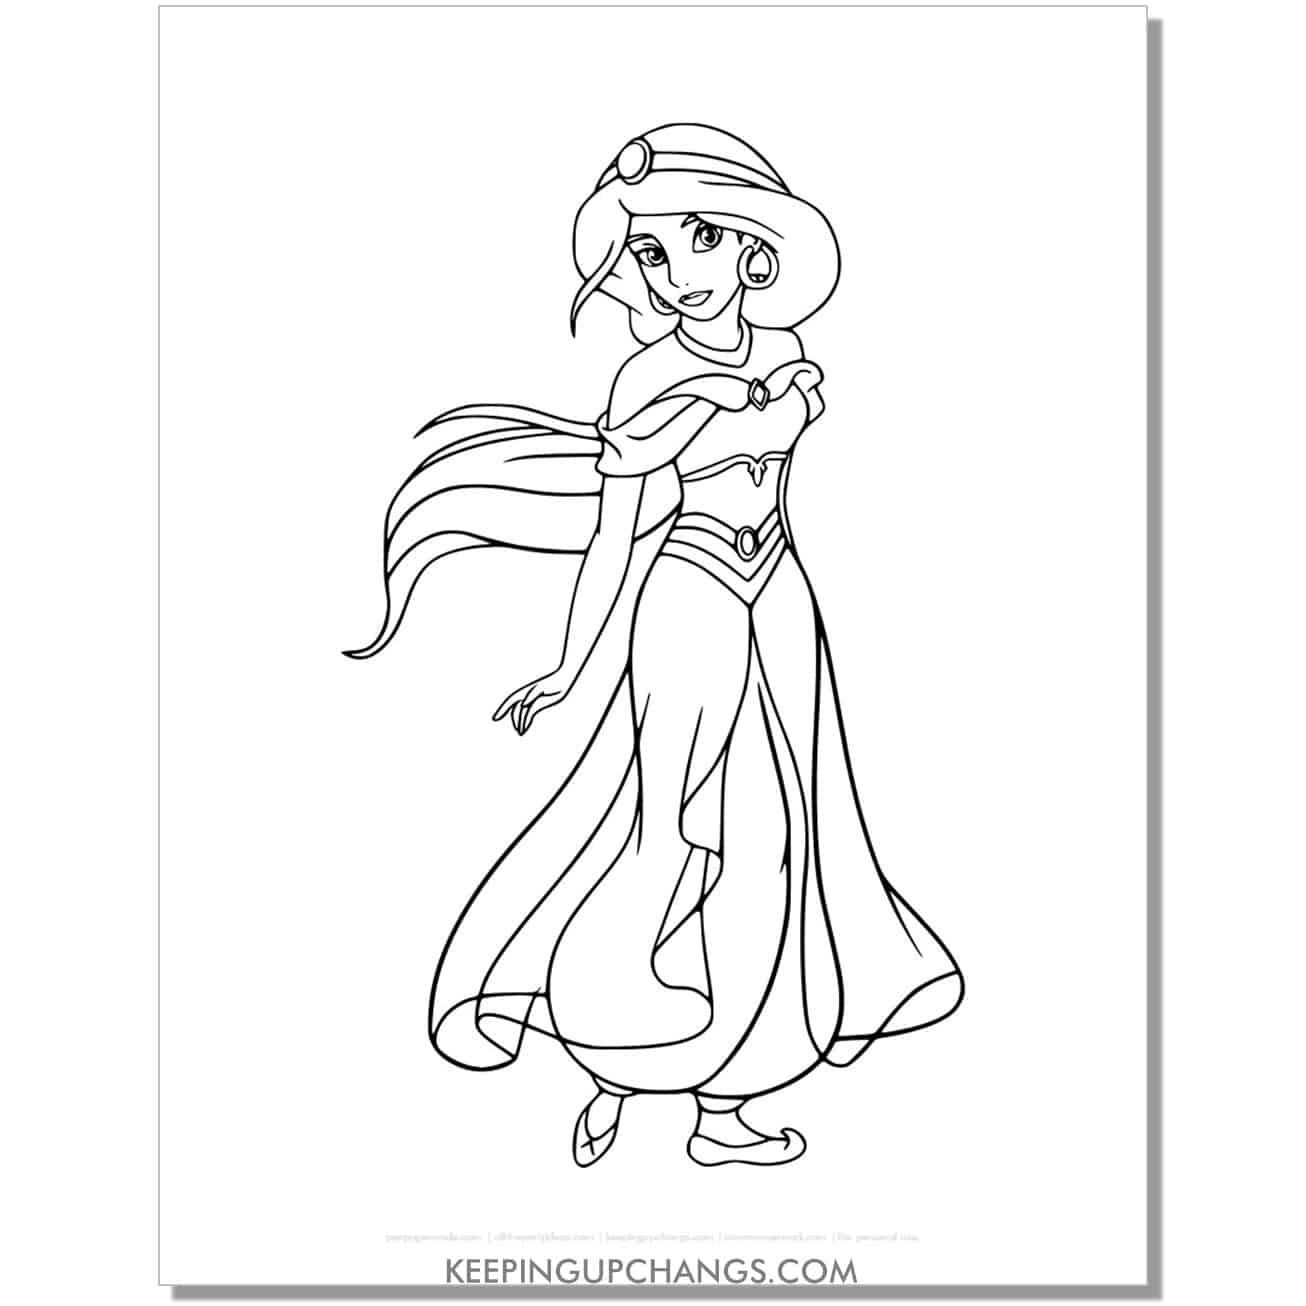 jasmine standing coloring page, sheet.